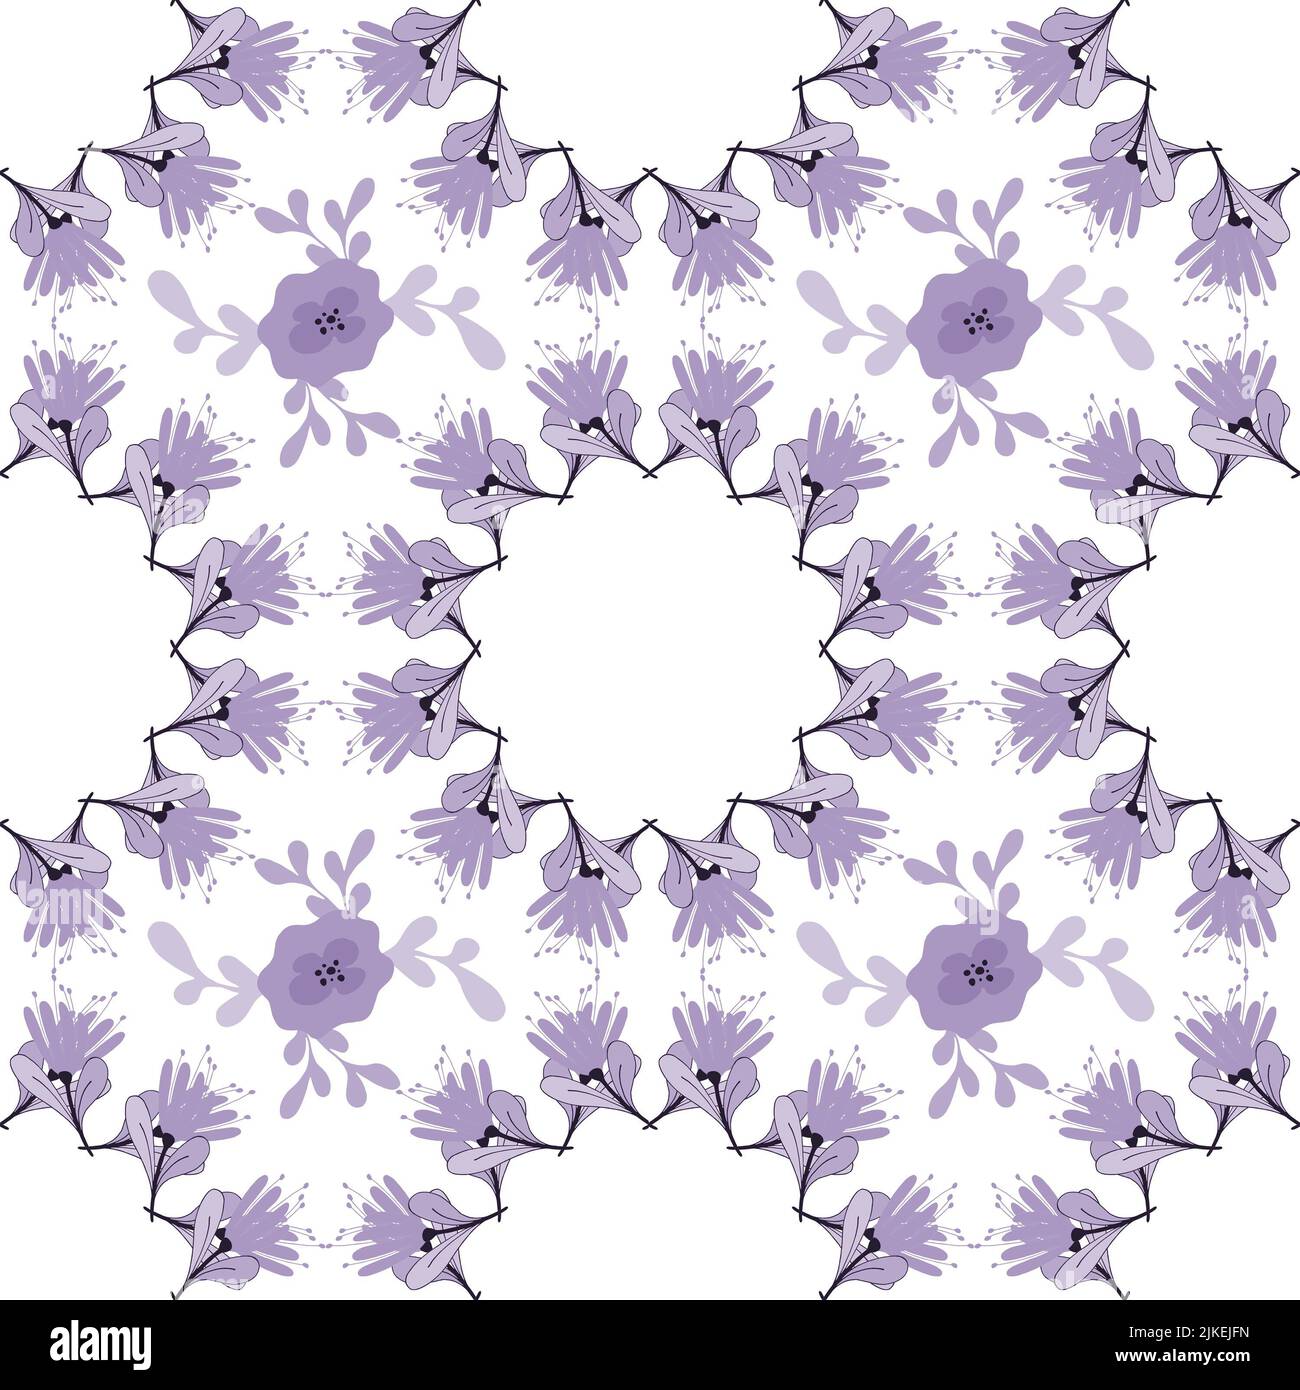 Flower garlands in soft purple with black accents on white. Seamless repeating pattern. Stock Photo